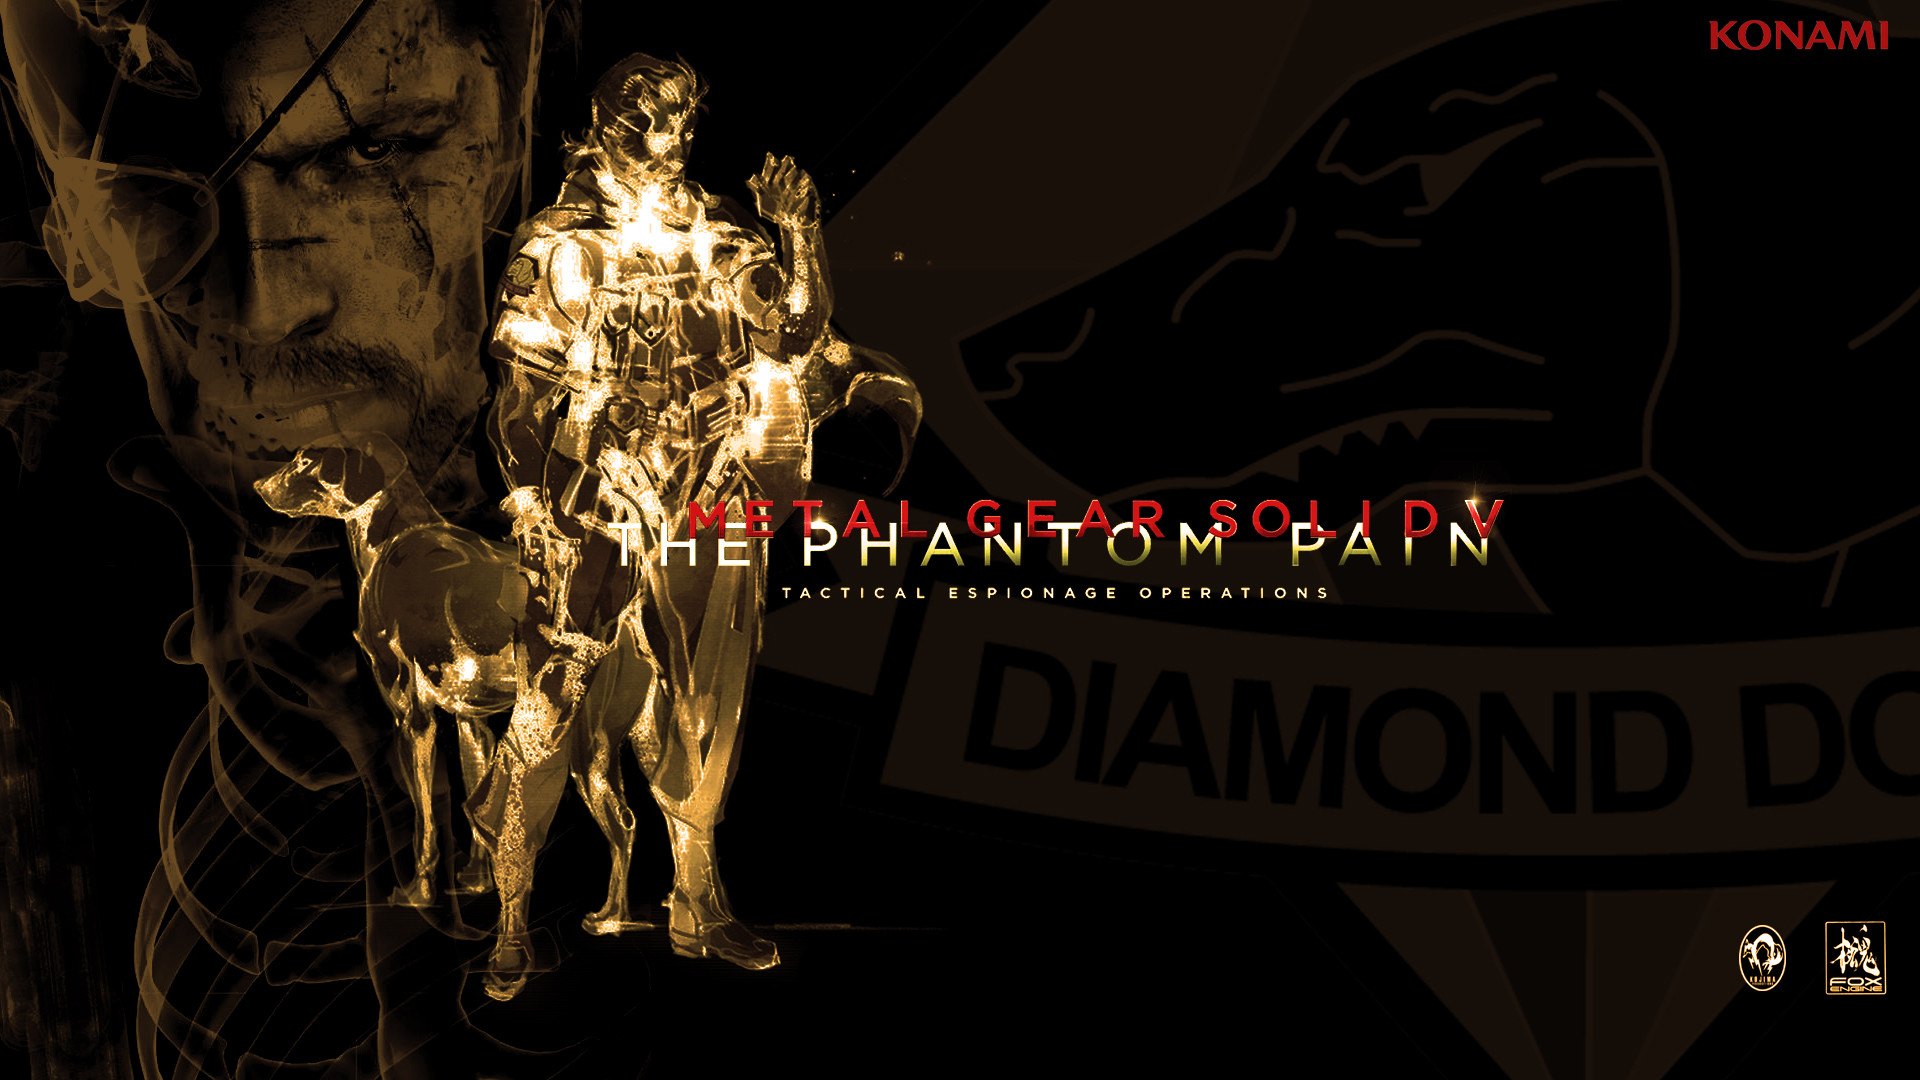 1920x1080 Heres a MGSV The Phantom Pain triple monitor wallpaper I made | Adorable  Wallpapers | Pinterest | Monitor, Wallpaper and Metal gear solid